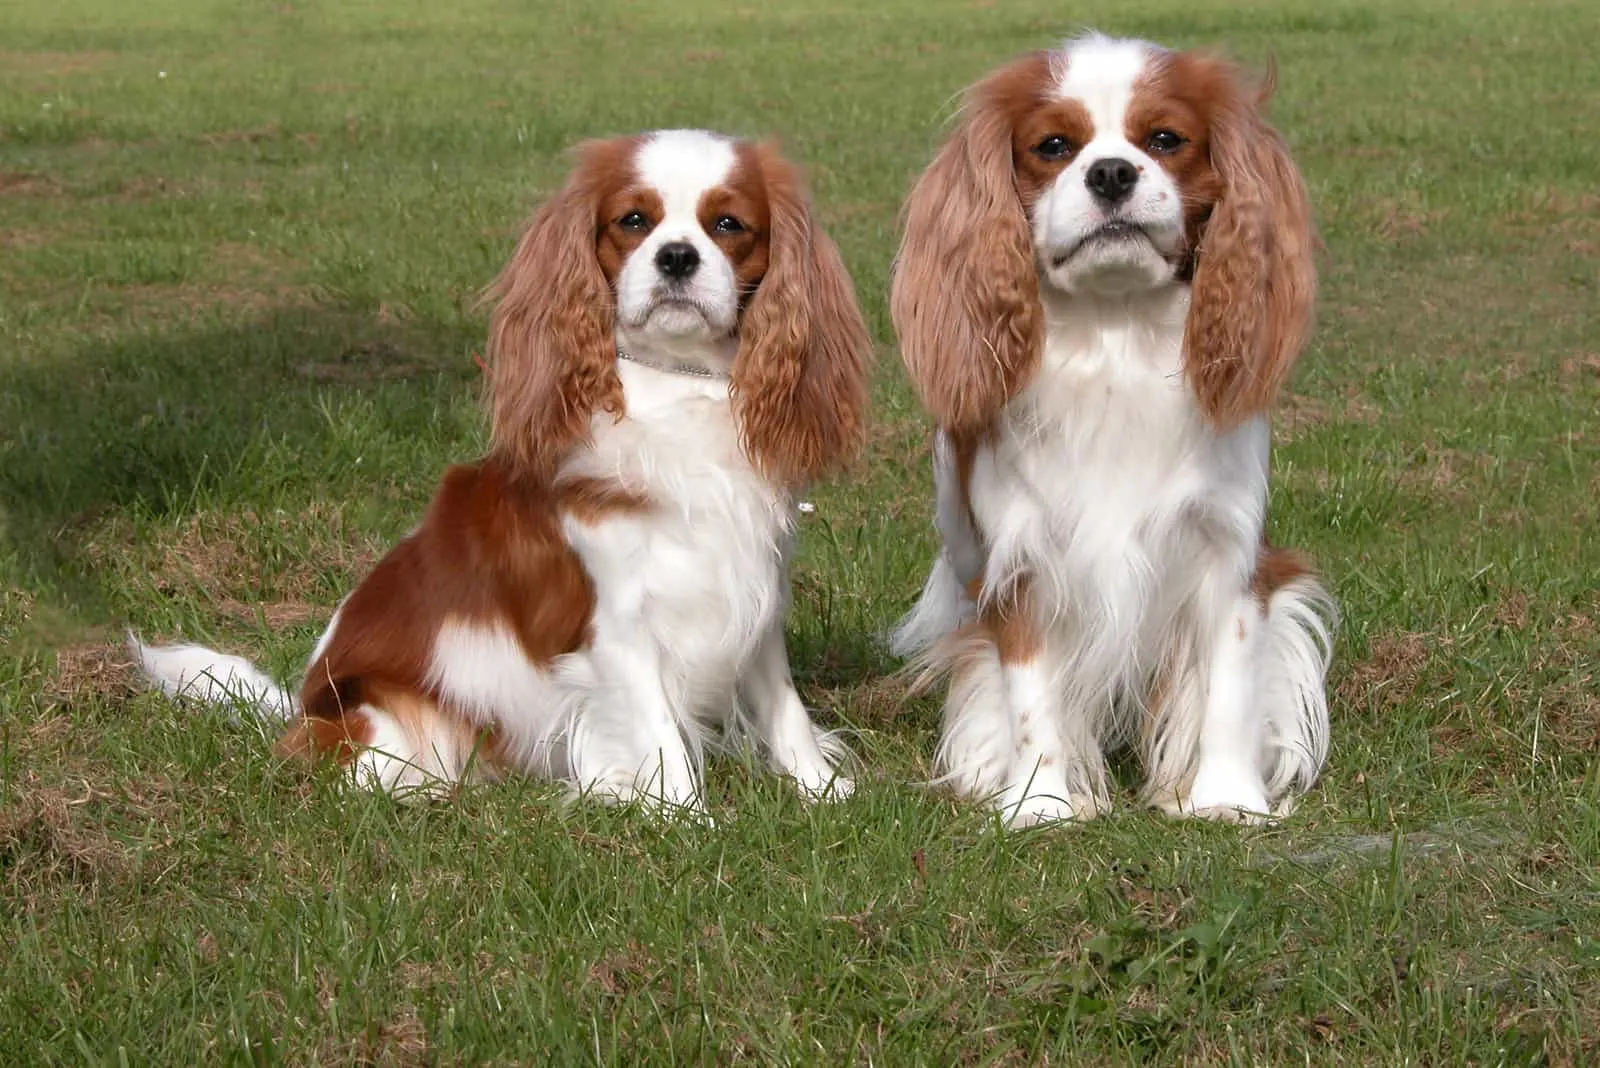 Two Cavalier King Charles Spaniels on grass